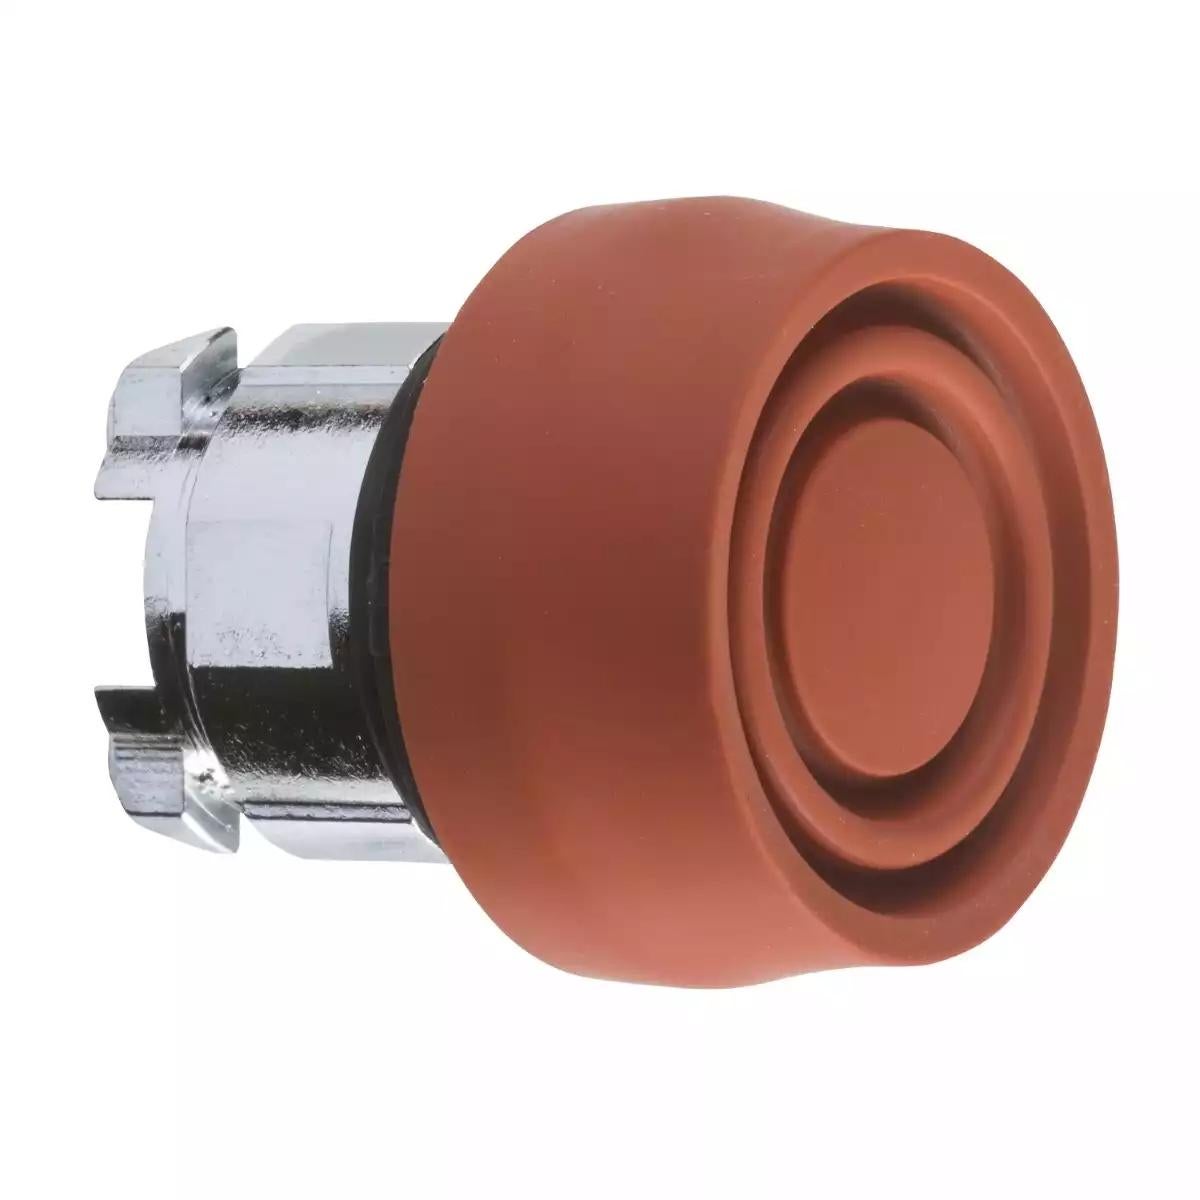 Head for non illuminated push button, Harmony XB4, red flush pushbutton Ø22 mm spring return unmarked